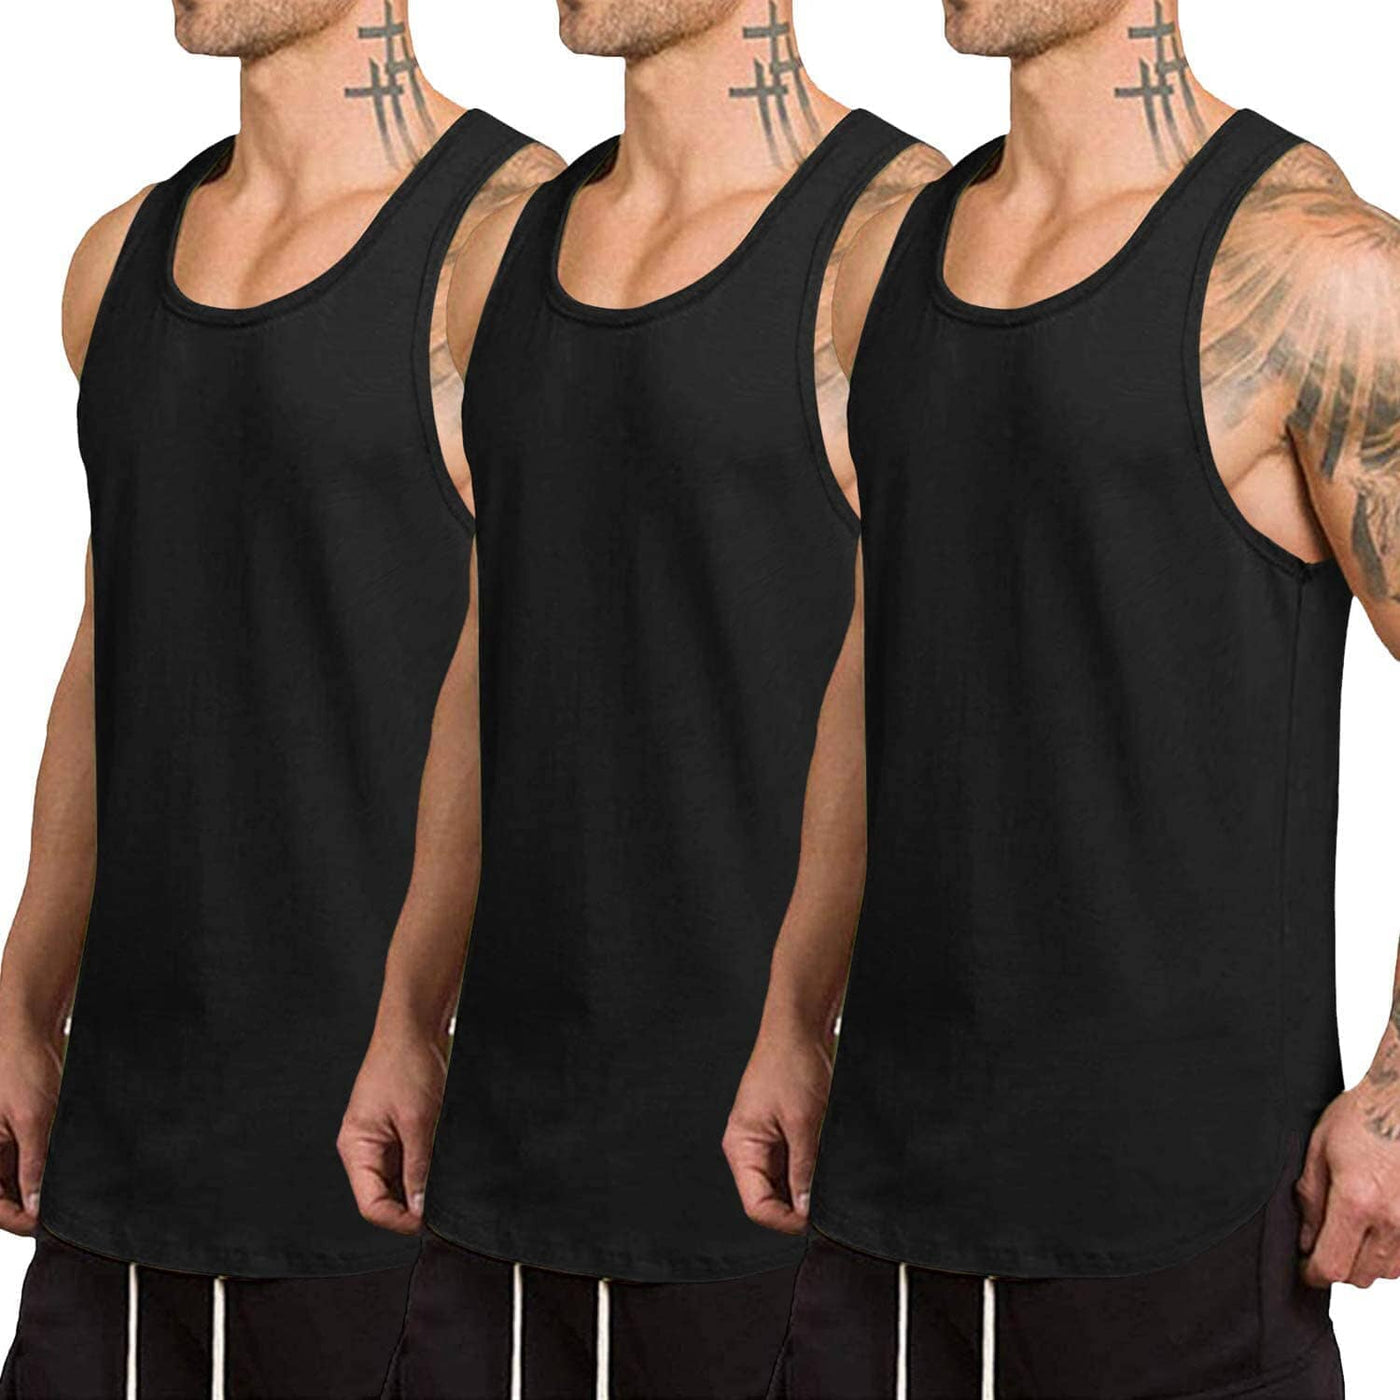 Coofandy 3-Pack Quick Dry Gym Vest (US Only) Tank Tops coofandy Black* 3 S 